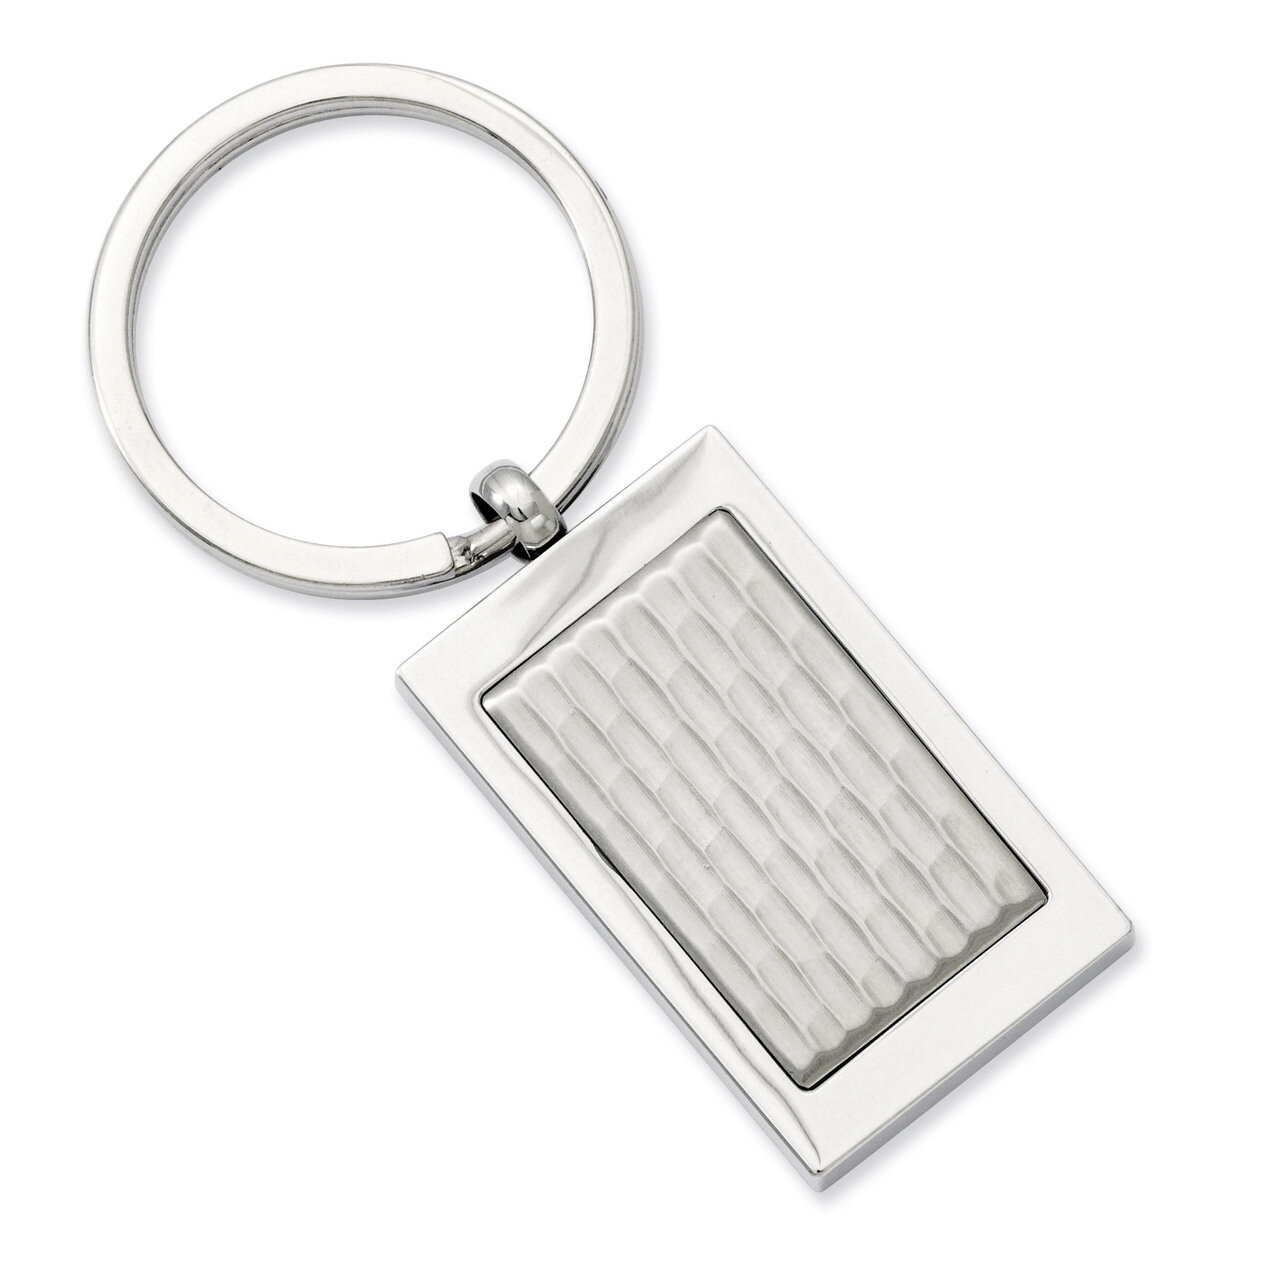 Polished and Textured Key Ring - Stainless Steel SRK127